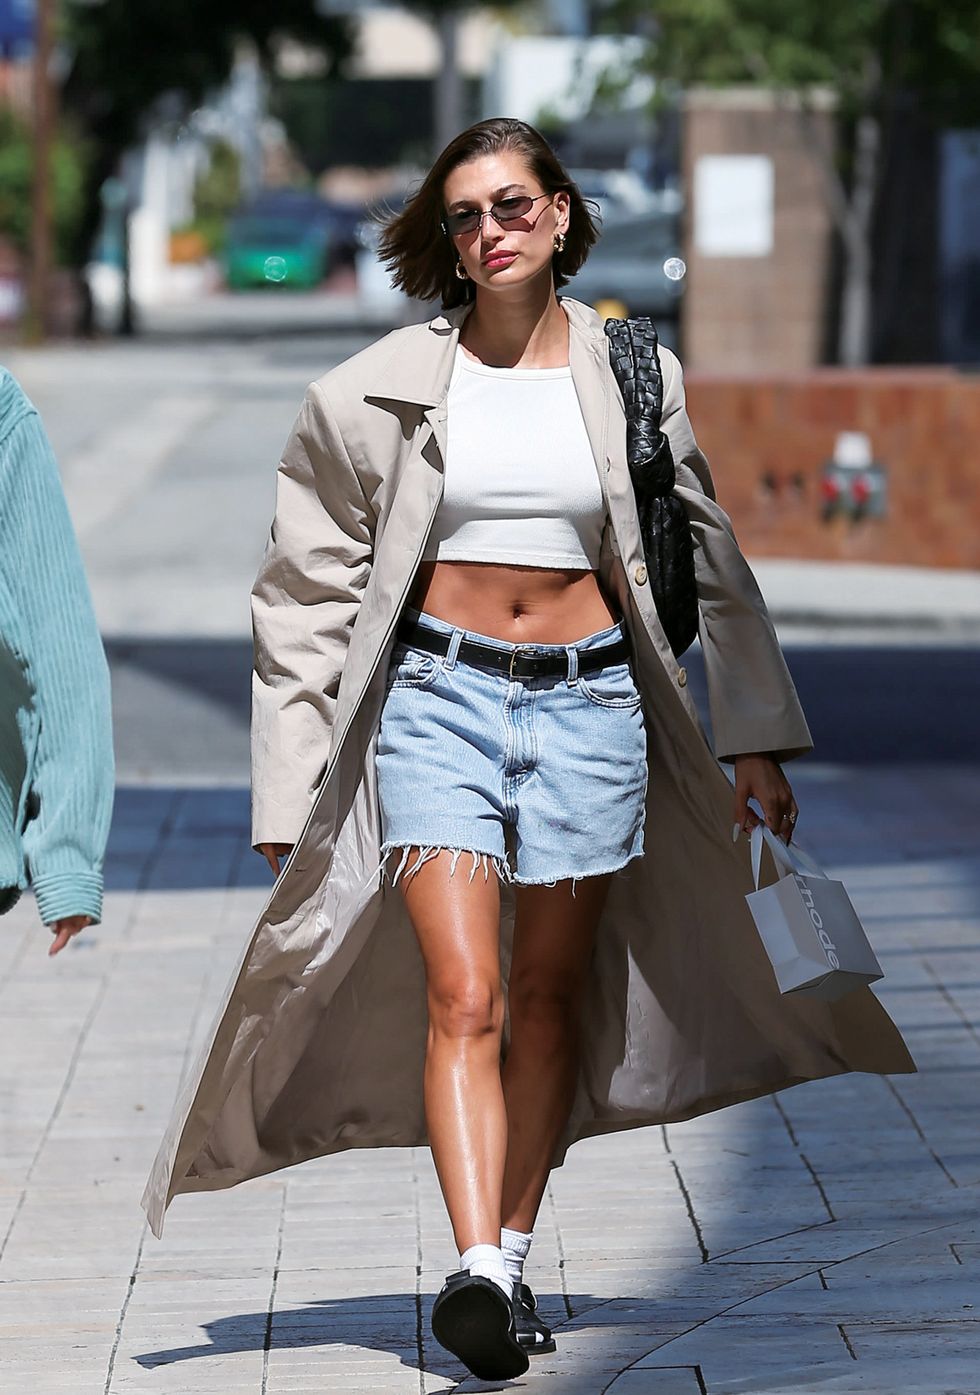 los angeles, ca june 27 hailey bieber is seen on june 27, 2023 in los angeles, california photo by thecelebrityfinderbauer griffingc images